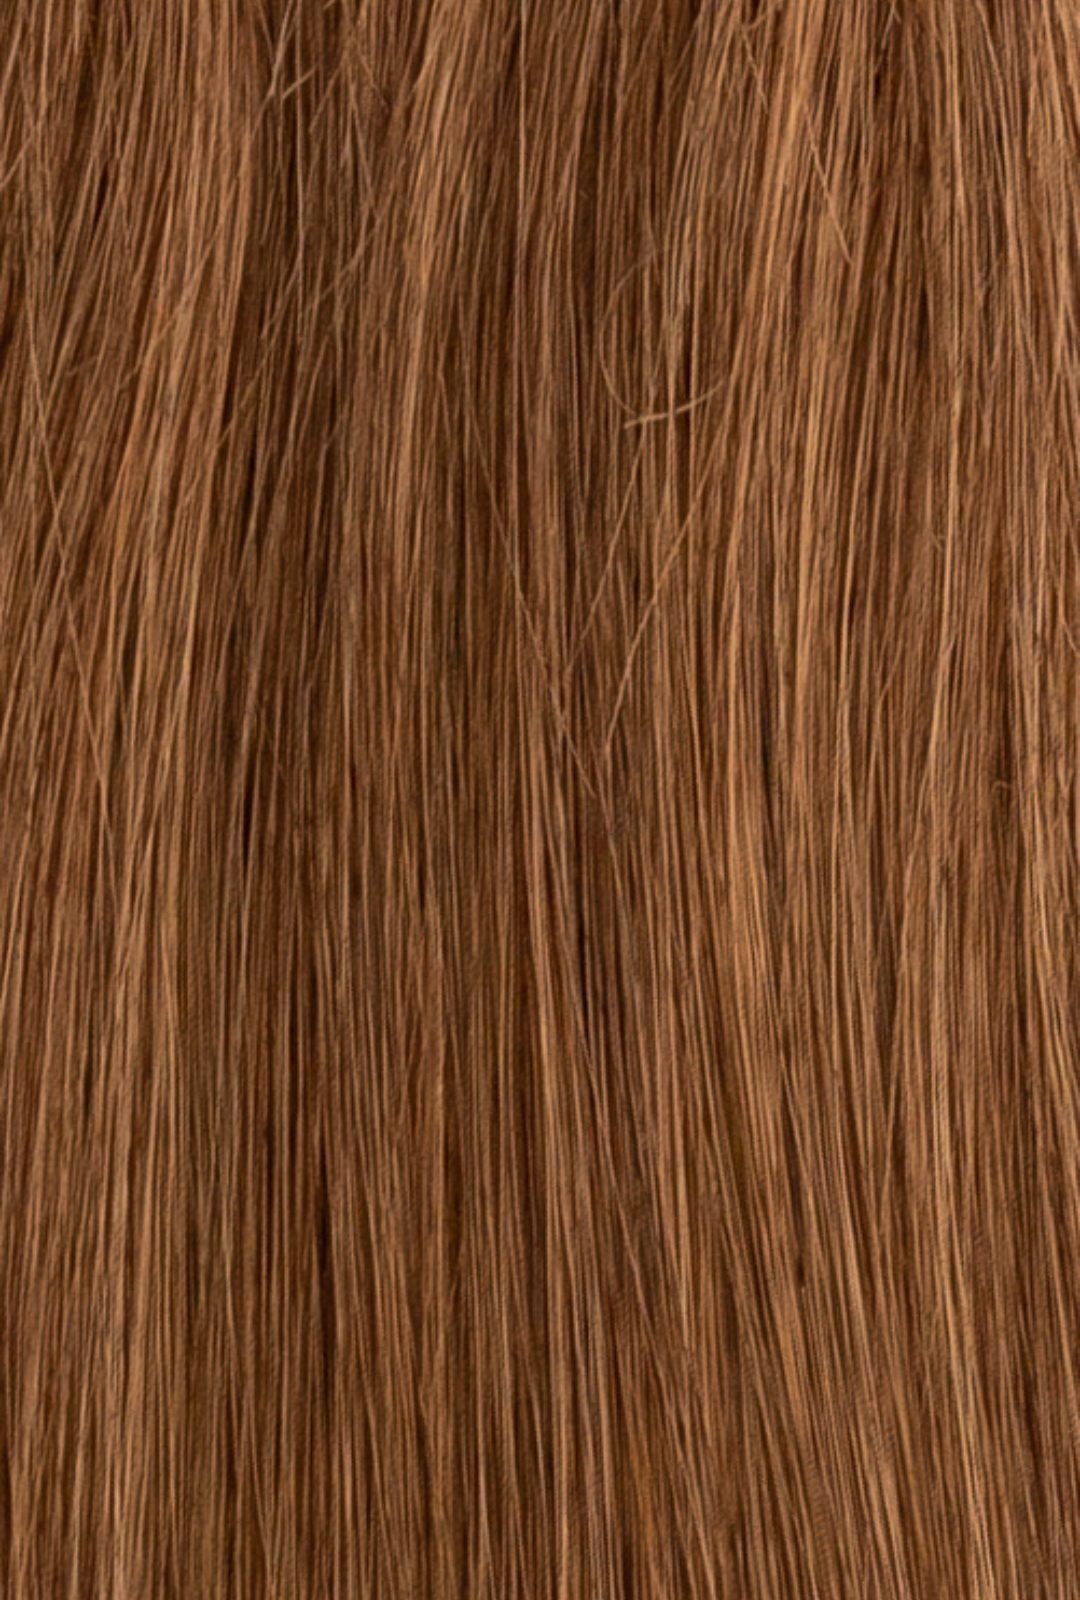 Laced Hair Machine Sewn Weft Extensions #33 (Copper Penny)